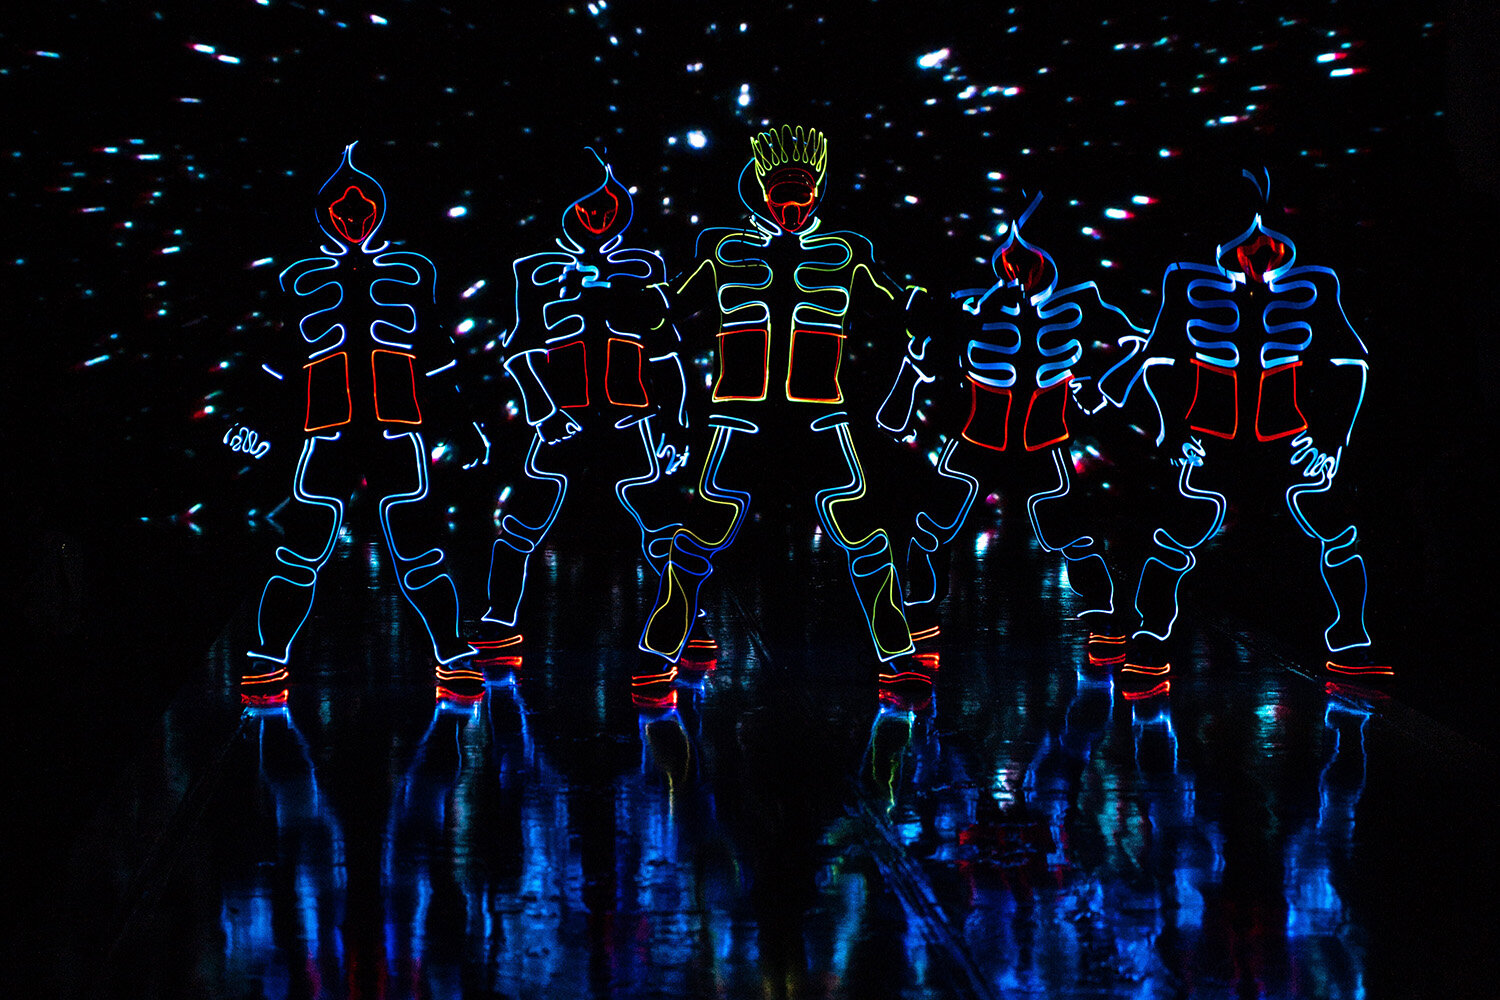 416 Bots is an engineered performance of lighting, music and dance.